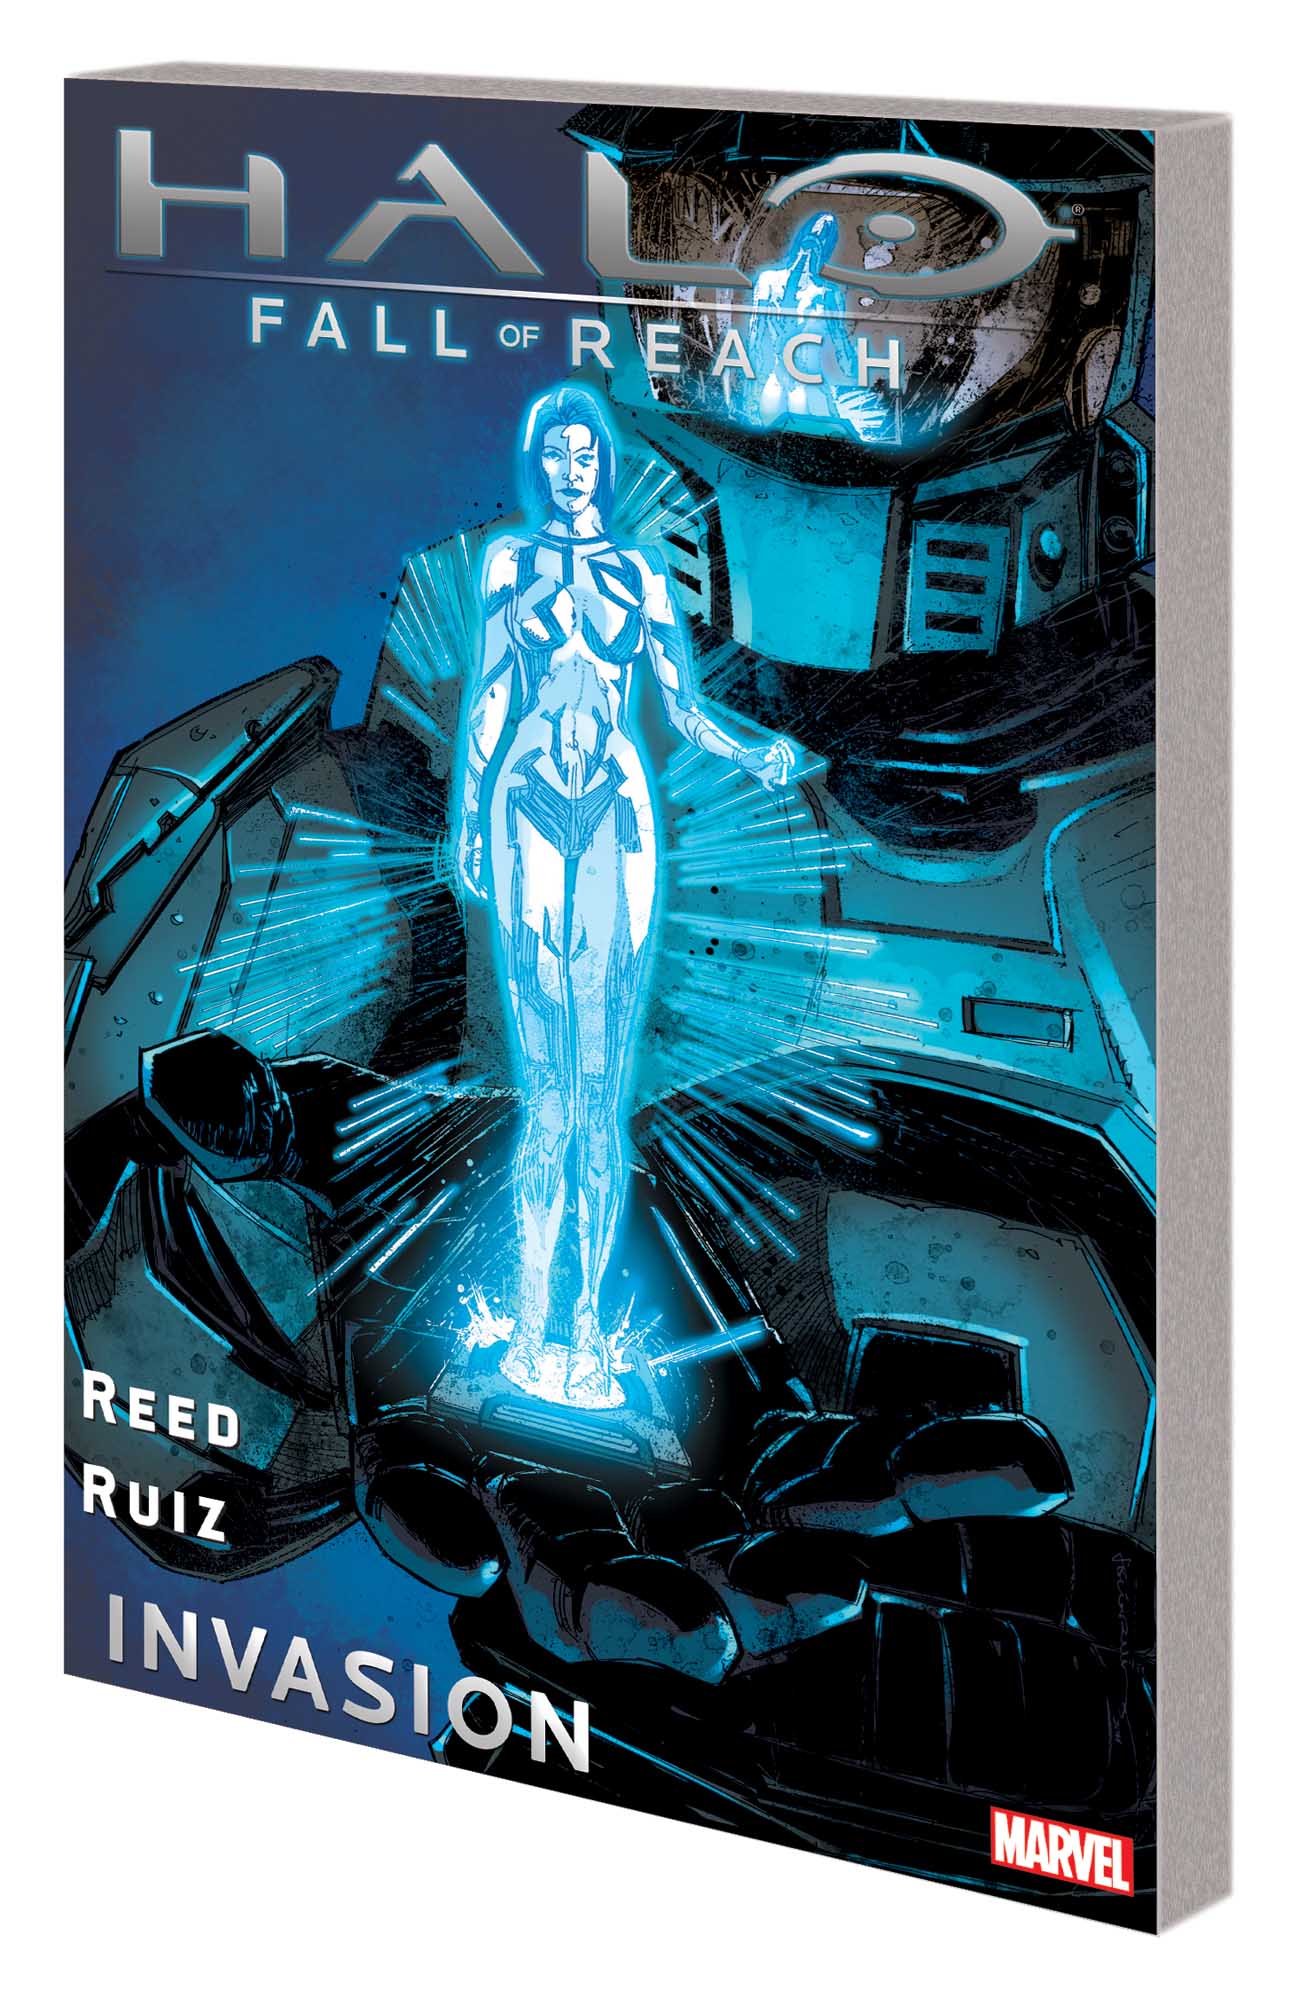 HALO: FALL OF REACH - INVASION TPB (Trade Paperback)